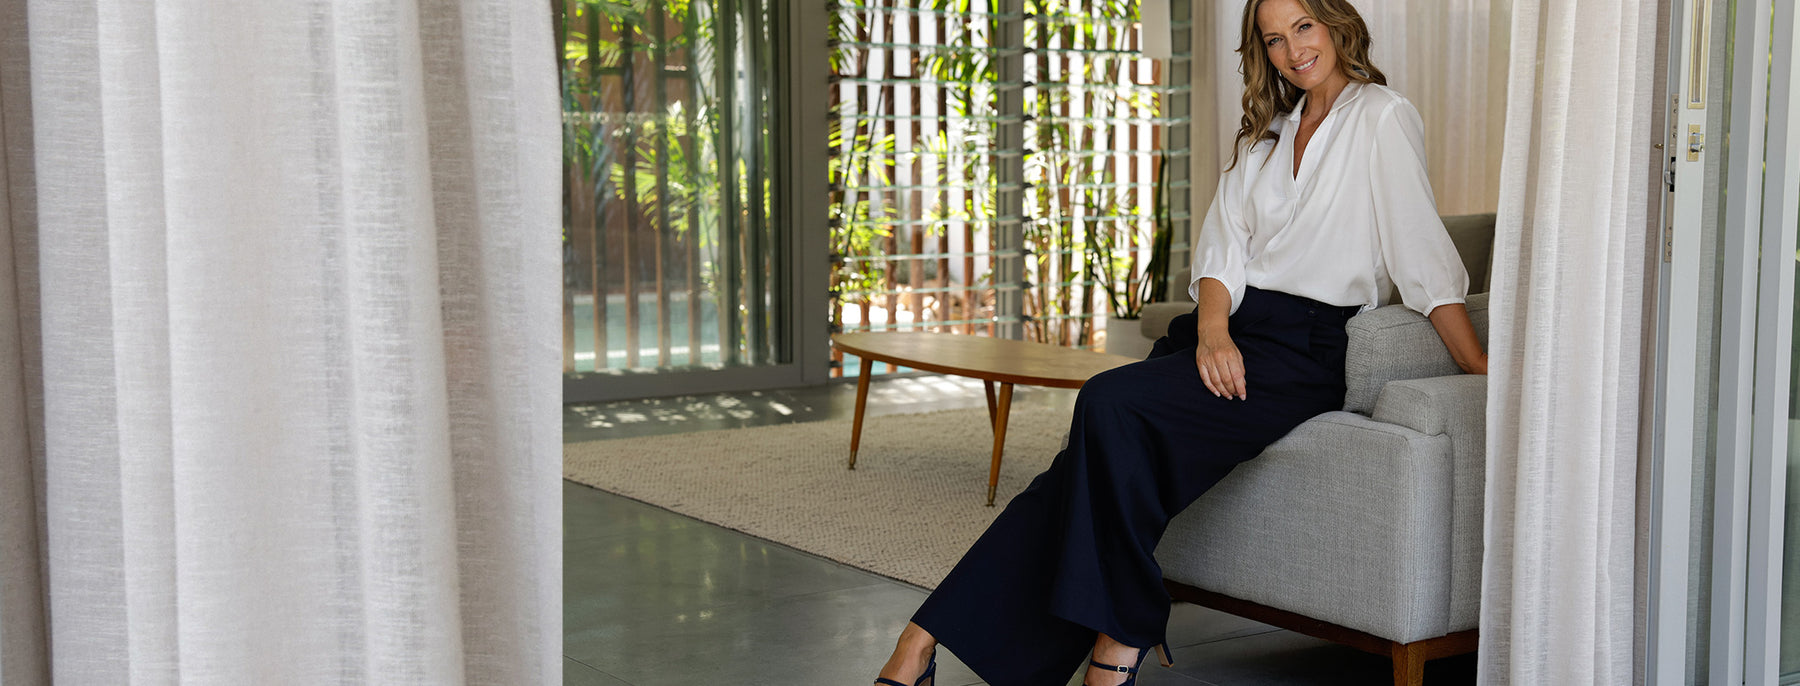 Fashion for the 40-plus woman, a mature woman wears soft tailoring, wide-leg navy blue trousers with a pull on white shirt, to showcase how soft tailoring creates easy elegance for style over 40.